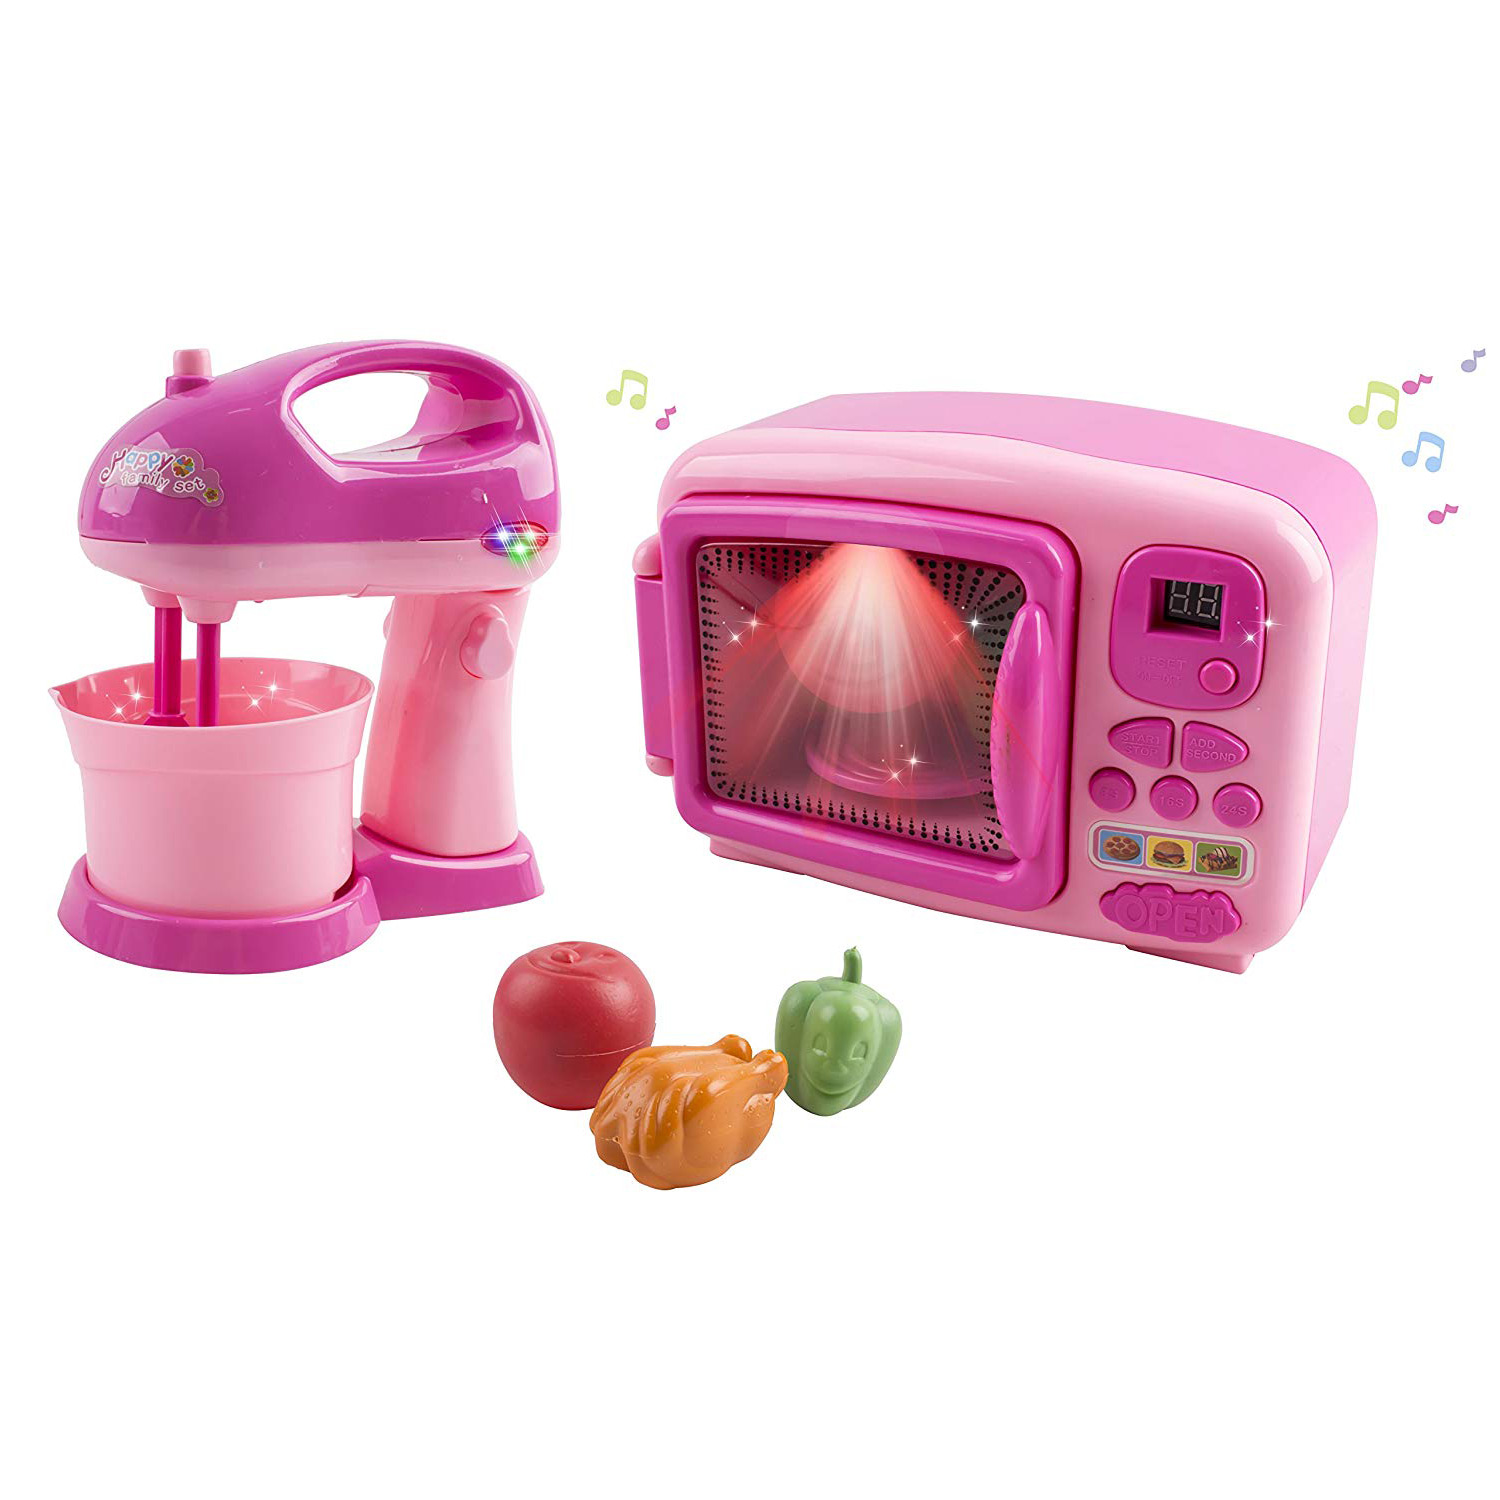 Toy Microwave and Mixing Blender Children\'s Kitchen Pretend Play Playset Battery Operated Appliance Set With Food Pieces Perfect For Early Learning Educational Preschool Girls Cooking Toys Pink